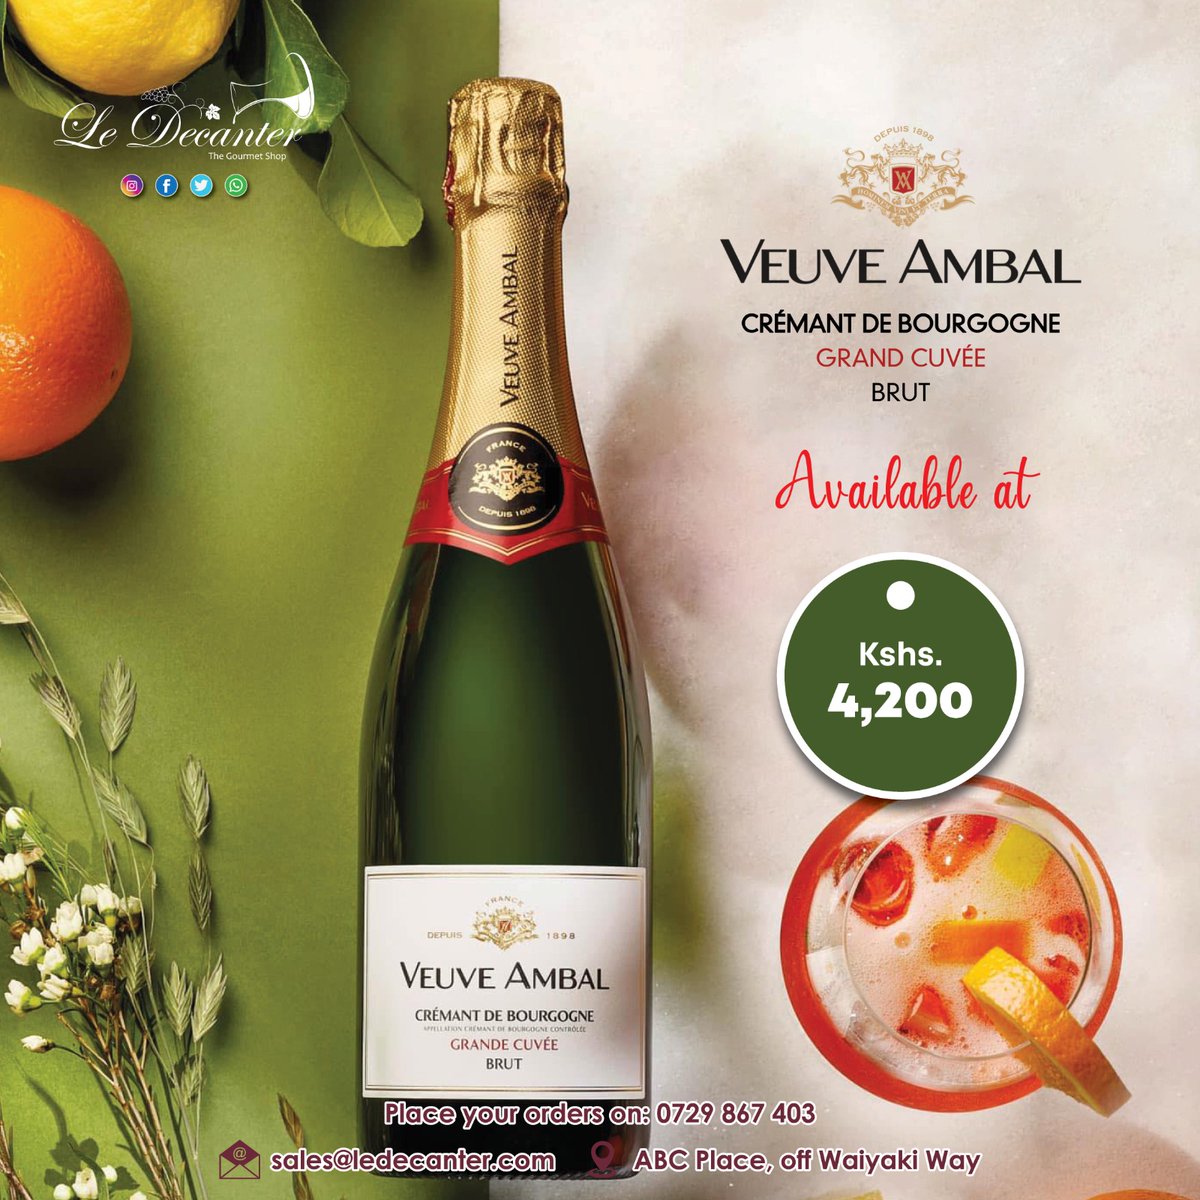 Veuve Ambal Cremant is predominantly made from Pinot Noir and Chardonnay Grapes but is also complemented by Aligote and Gamay grapes. This Sparkling wine is just excellent. Available at our shop for 4,200/= Email us on sales@ledecanter.com #ledecanter #ledecanterwines